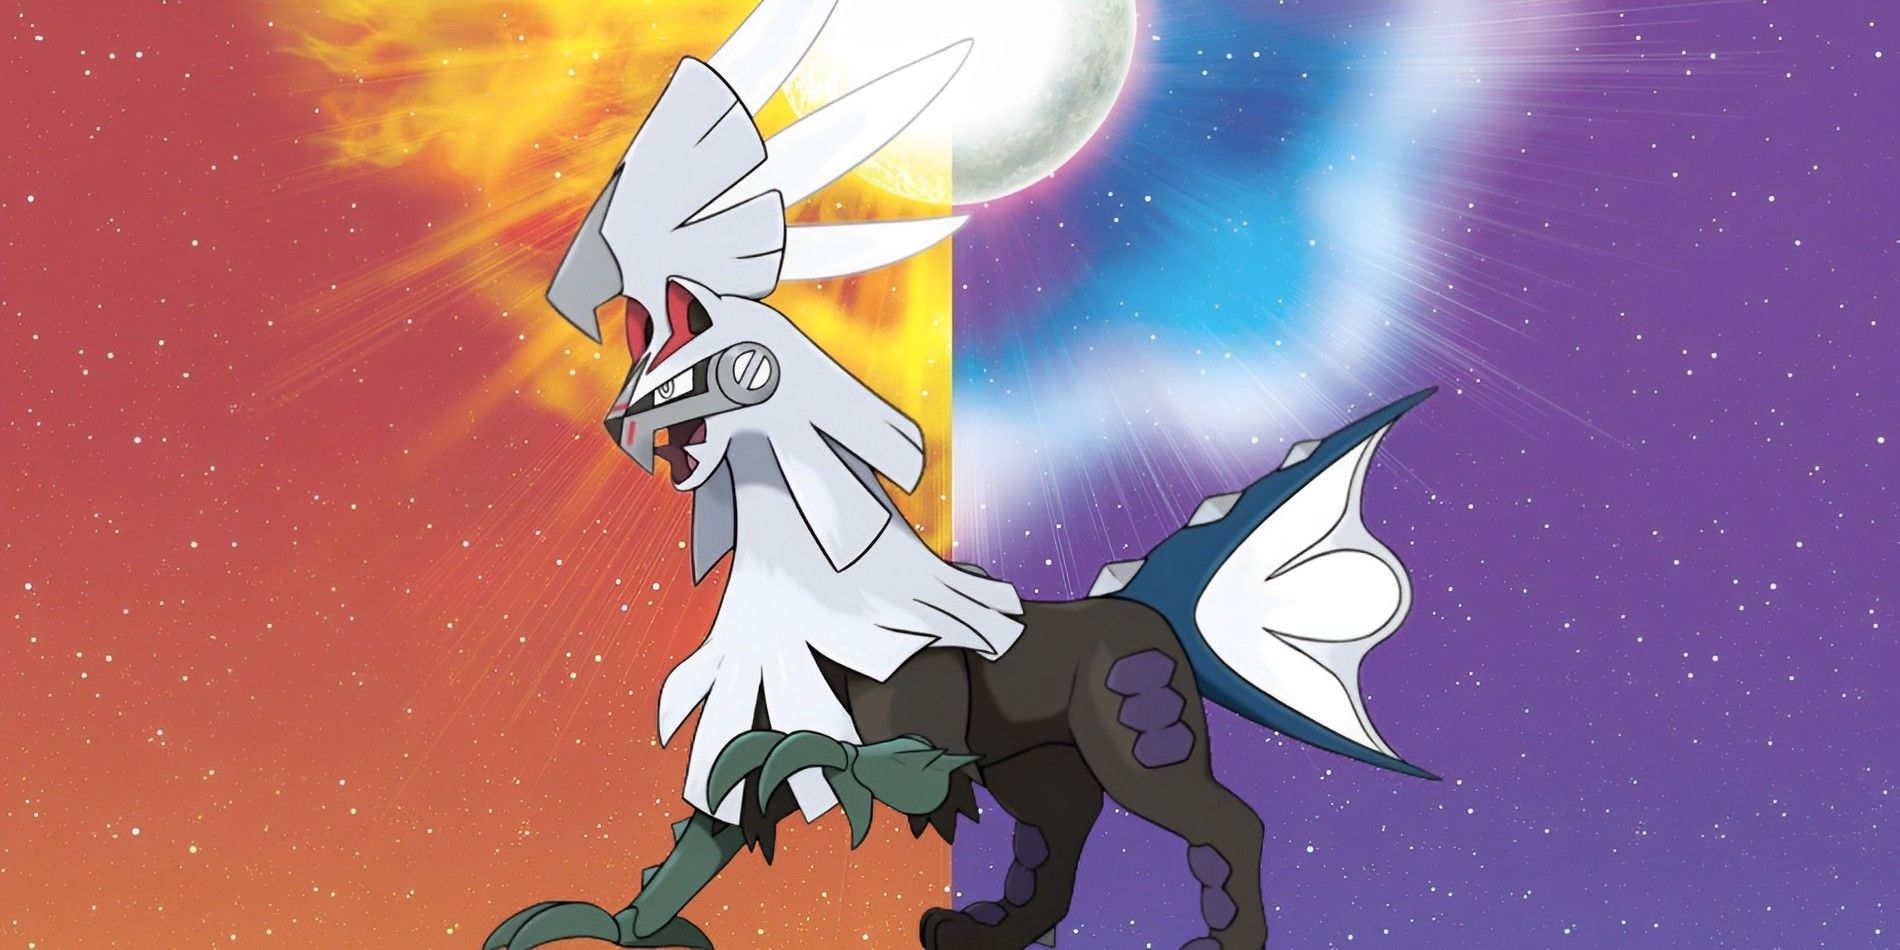 Silvally in its standard form